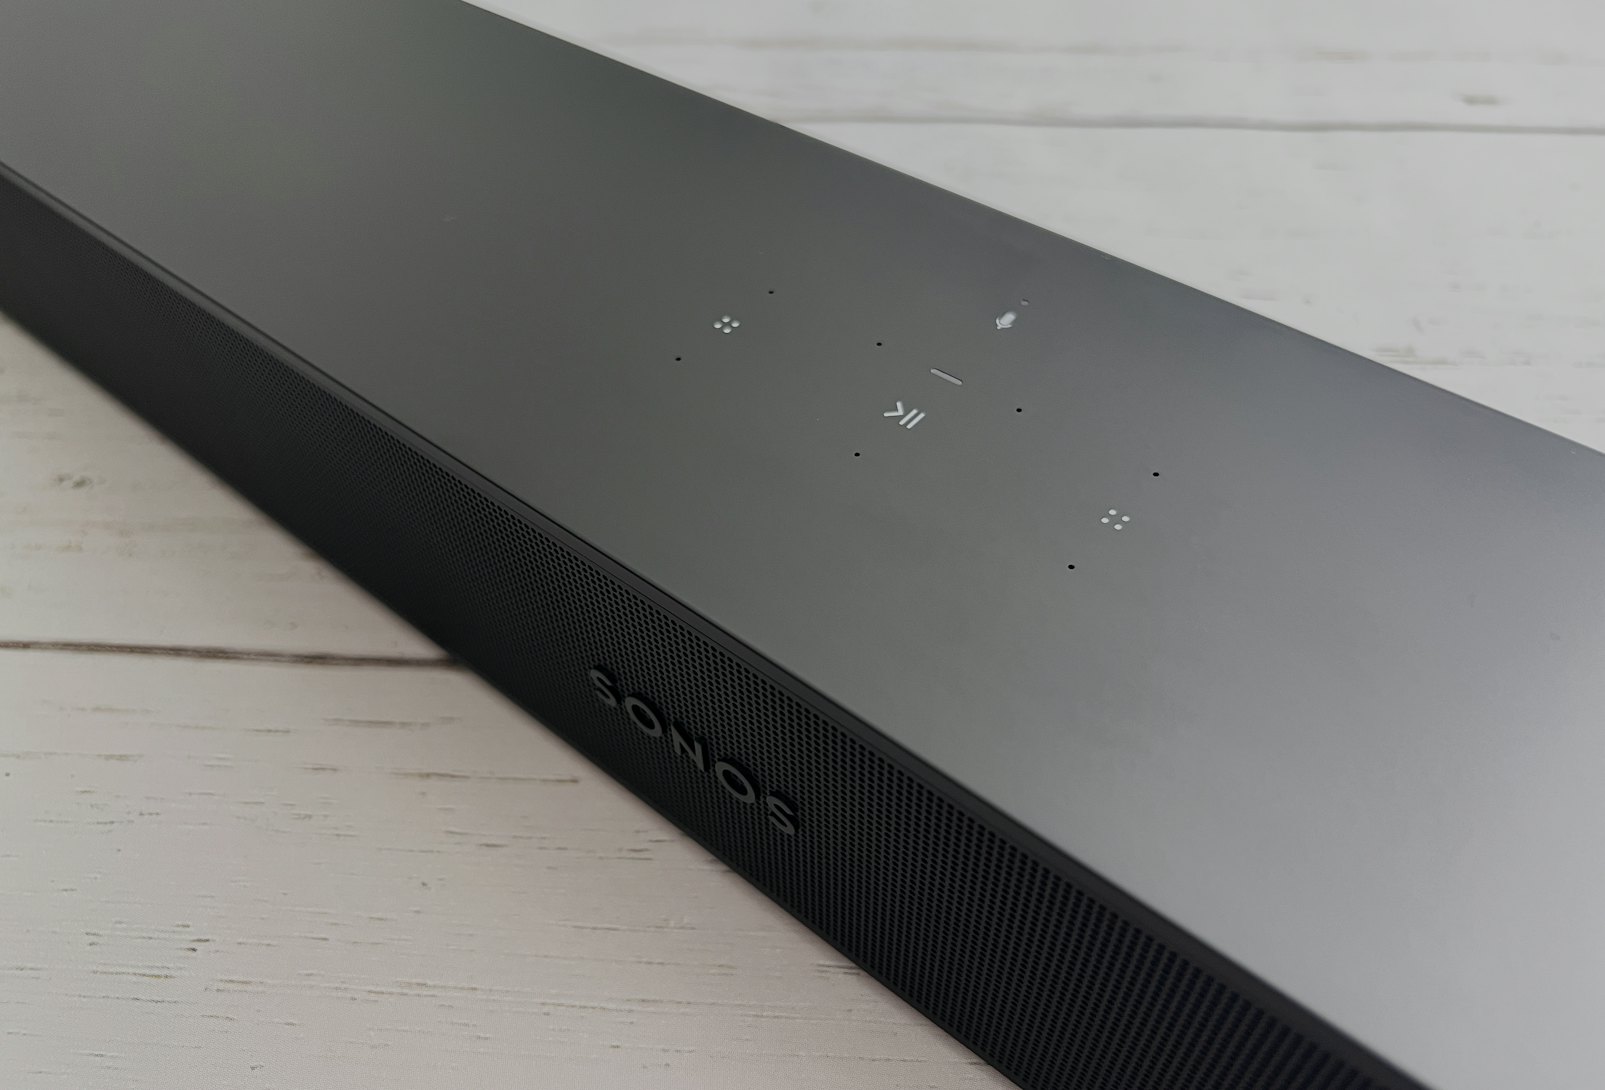 Sonos Beam (Gen 2) review: What this incredible wizardry?